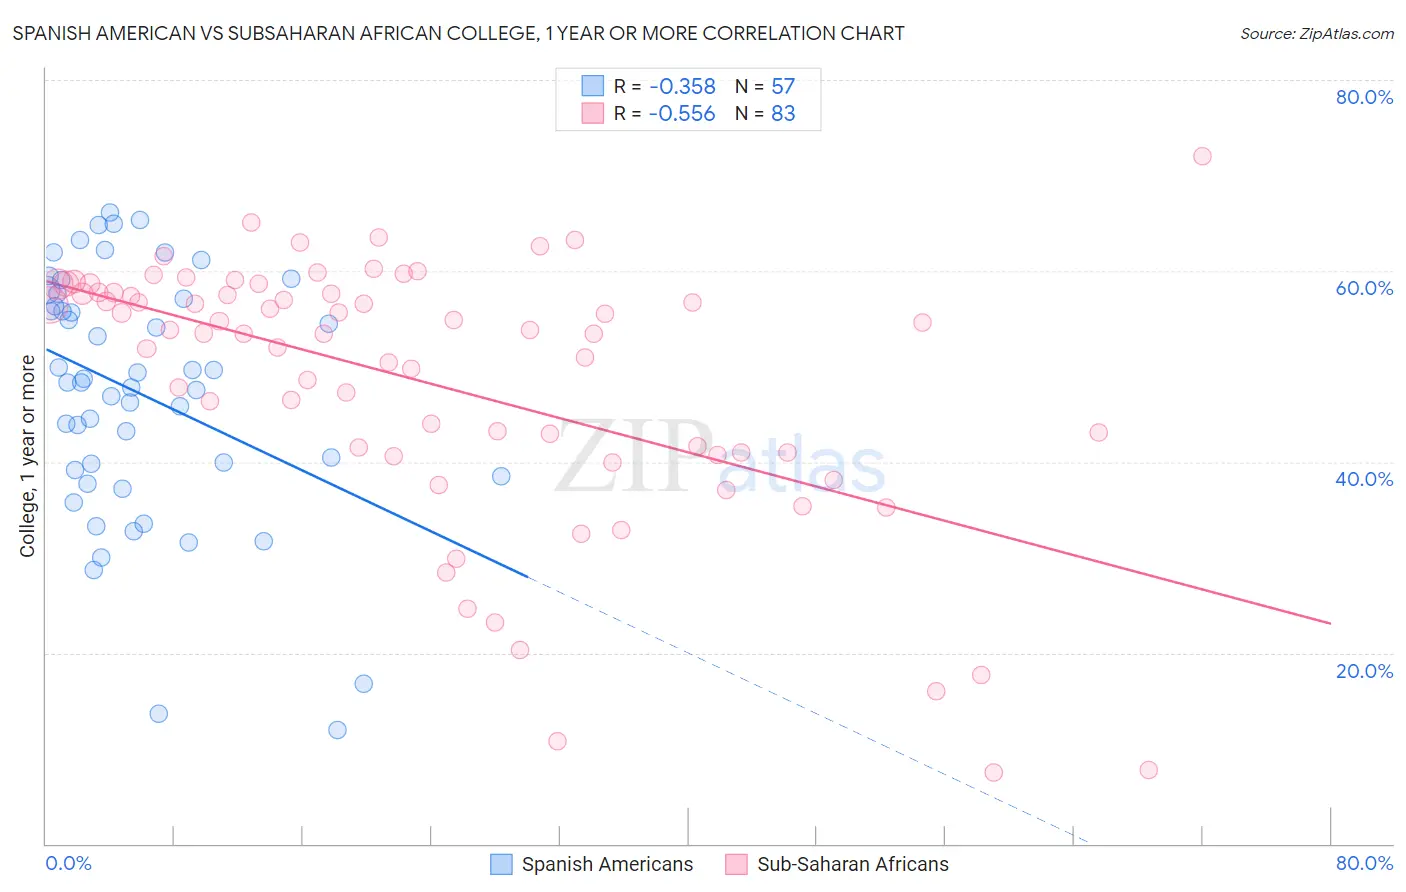 Spanish American vs Subsaharan African College, 1 year or more